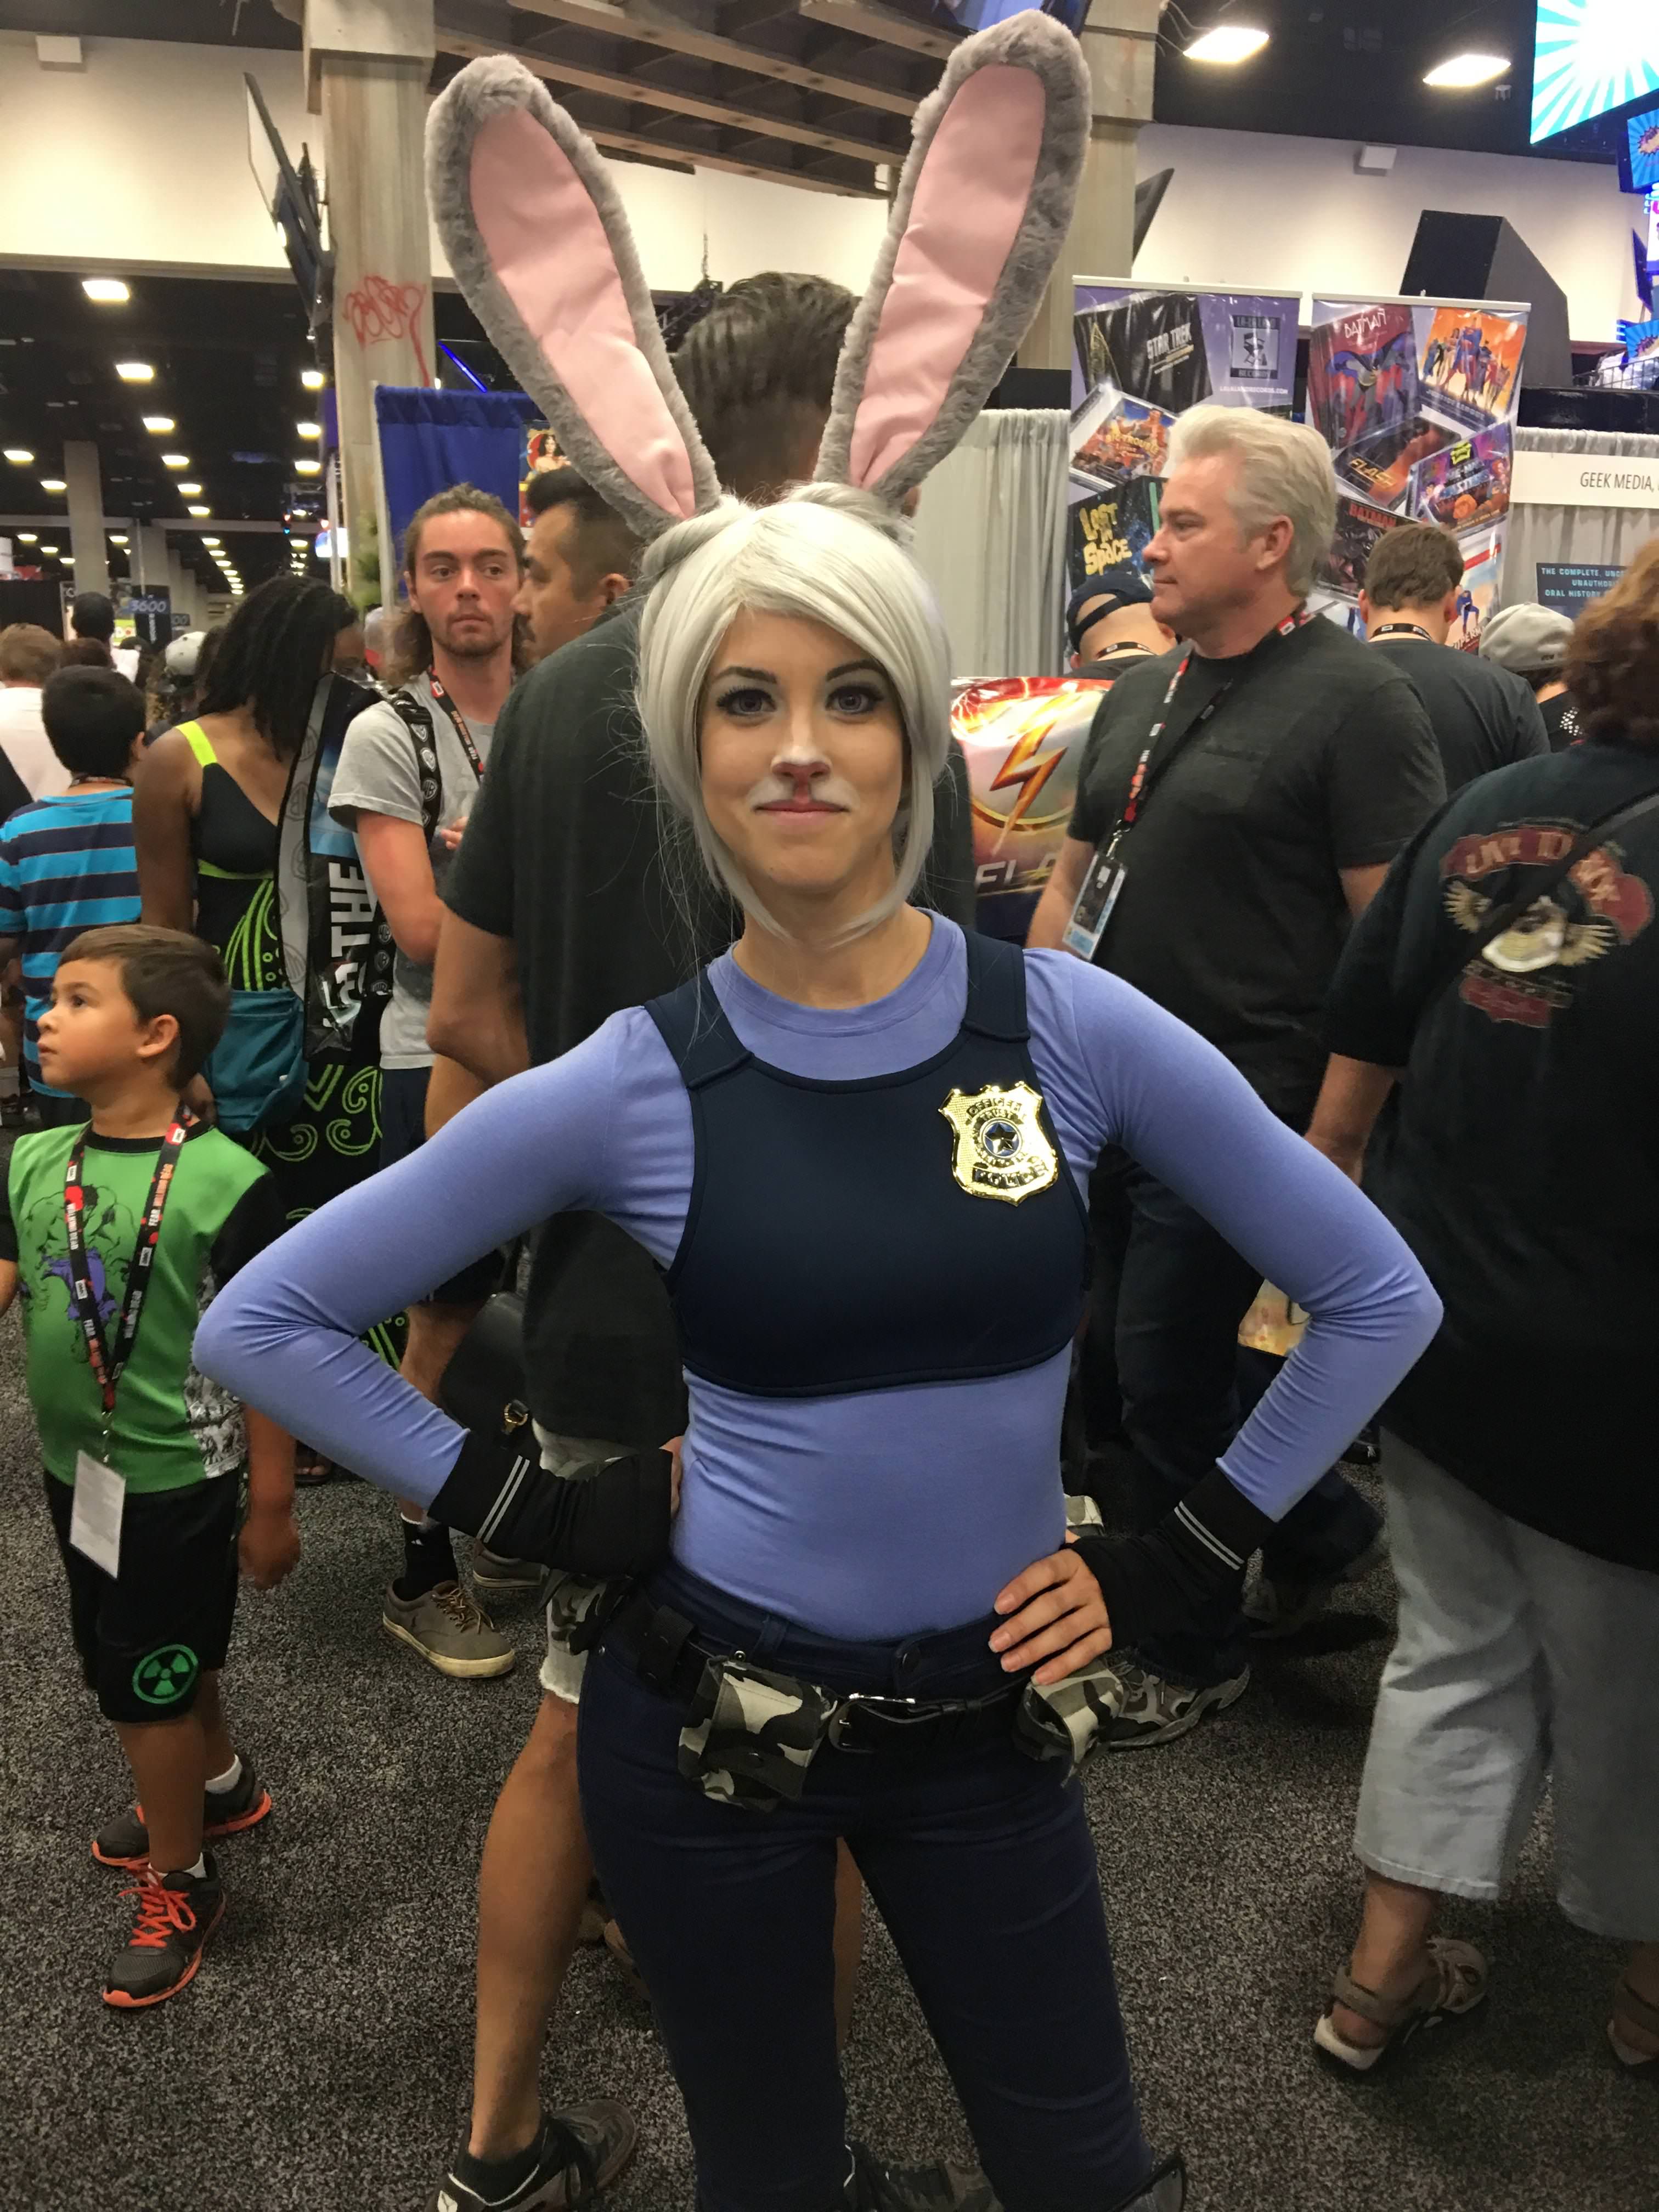 Girl cop with large bunny ears